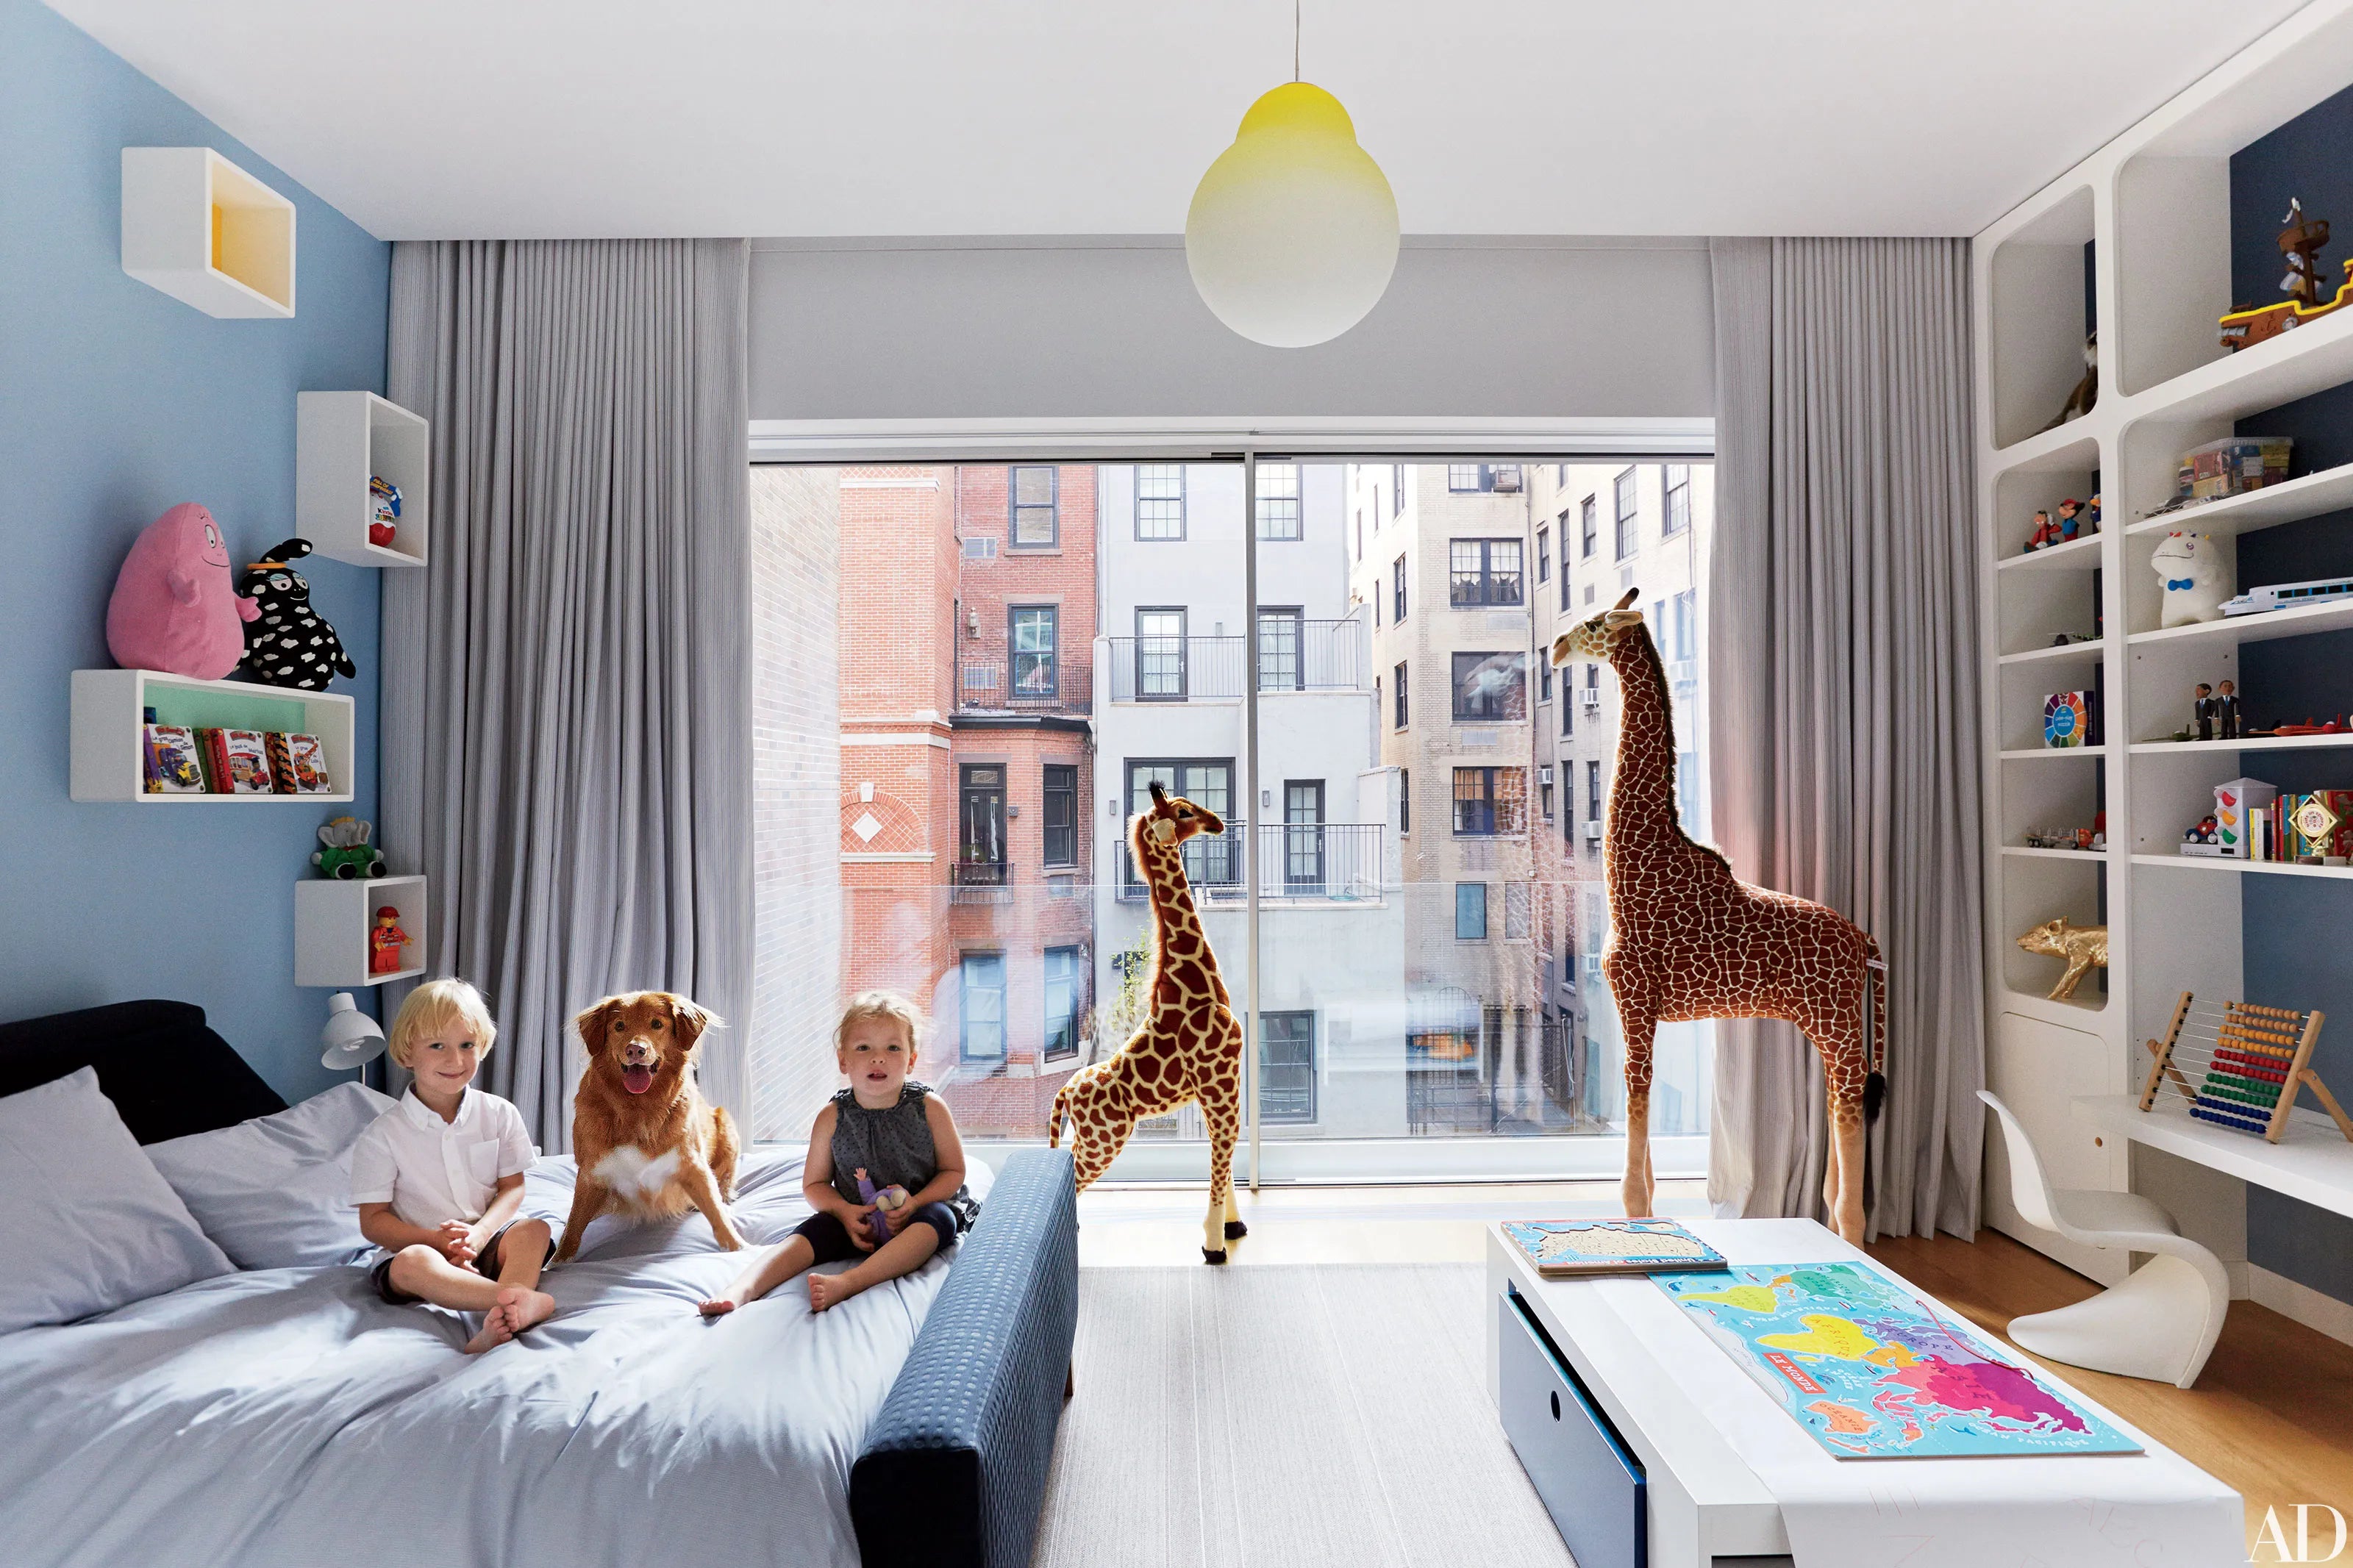 Playful and Elegant Room Designs That Will Reveal Your Inner Child